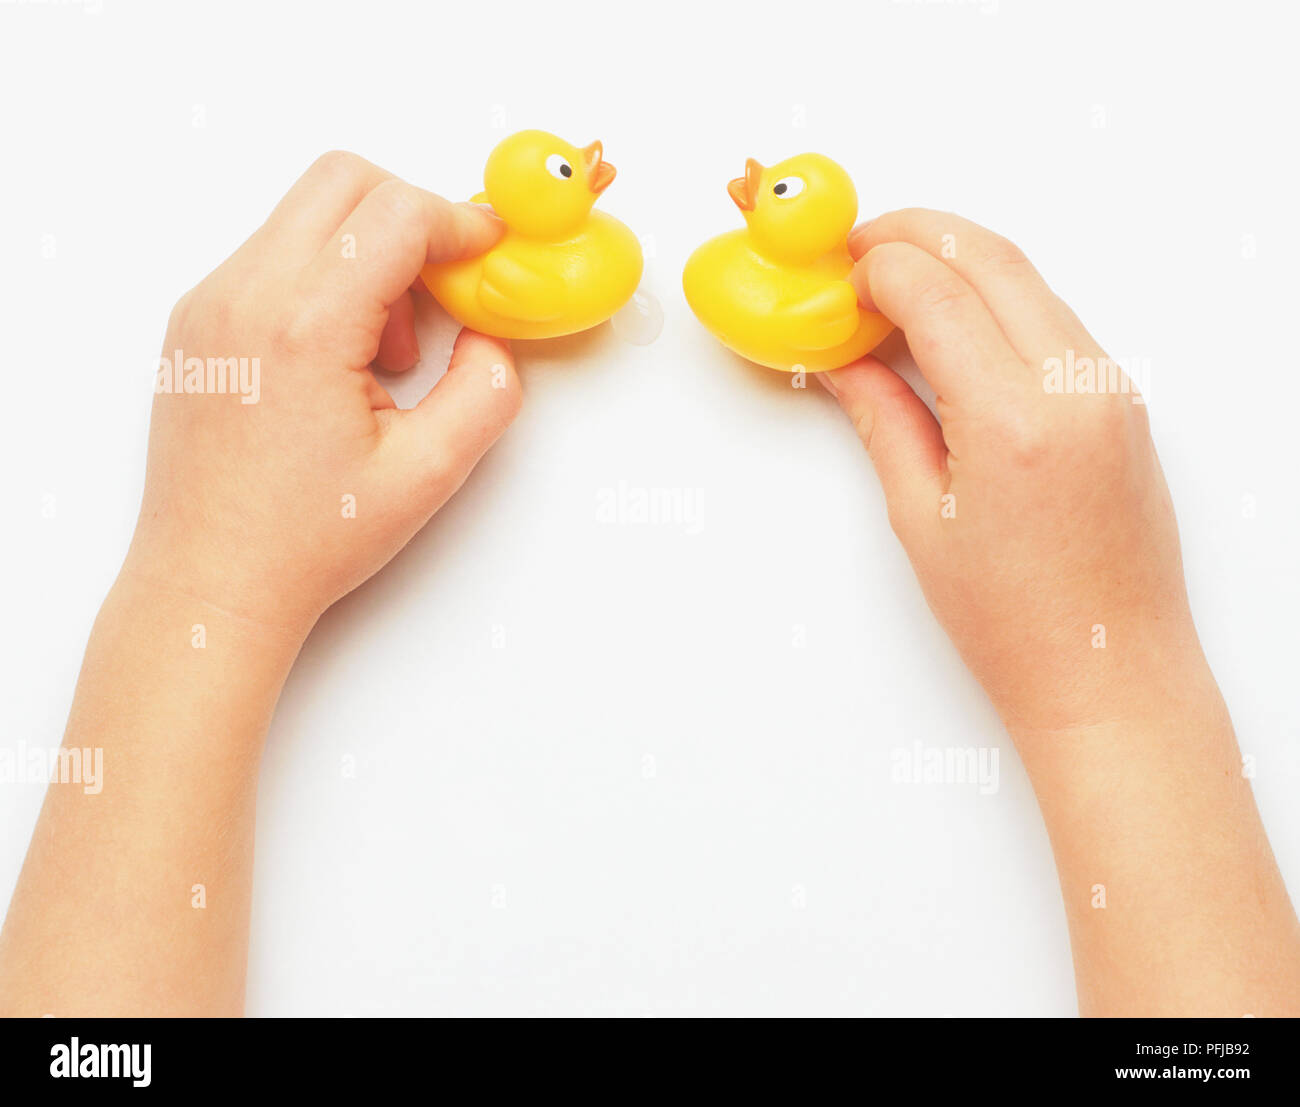 Pair of hands holding up two yellow rubber ducks Stock Photo